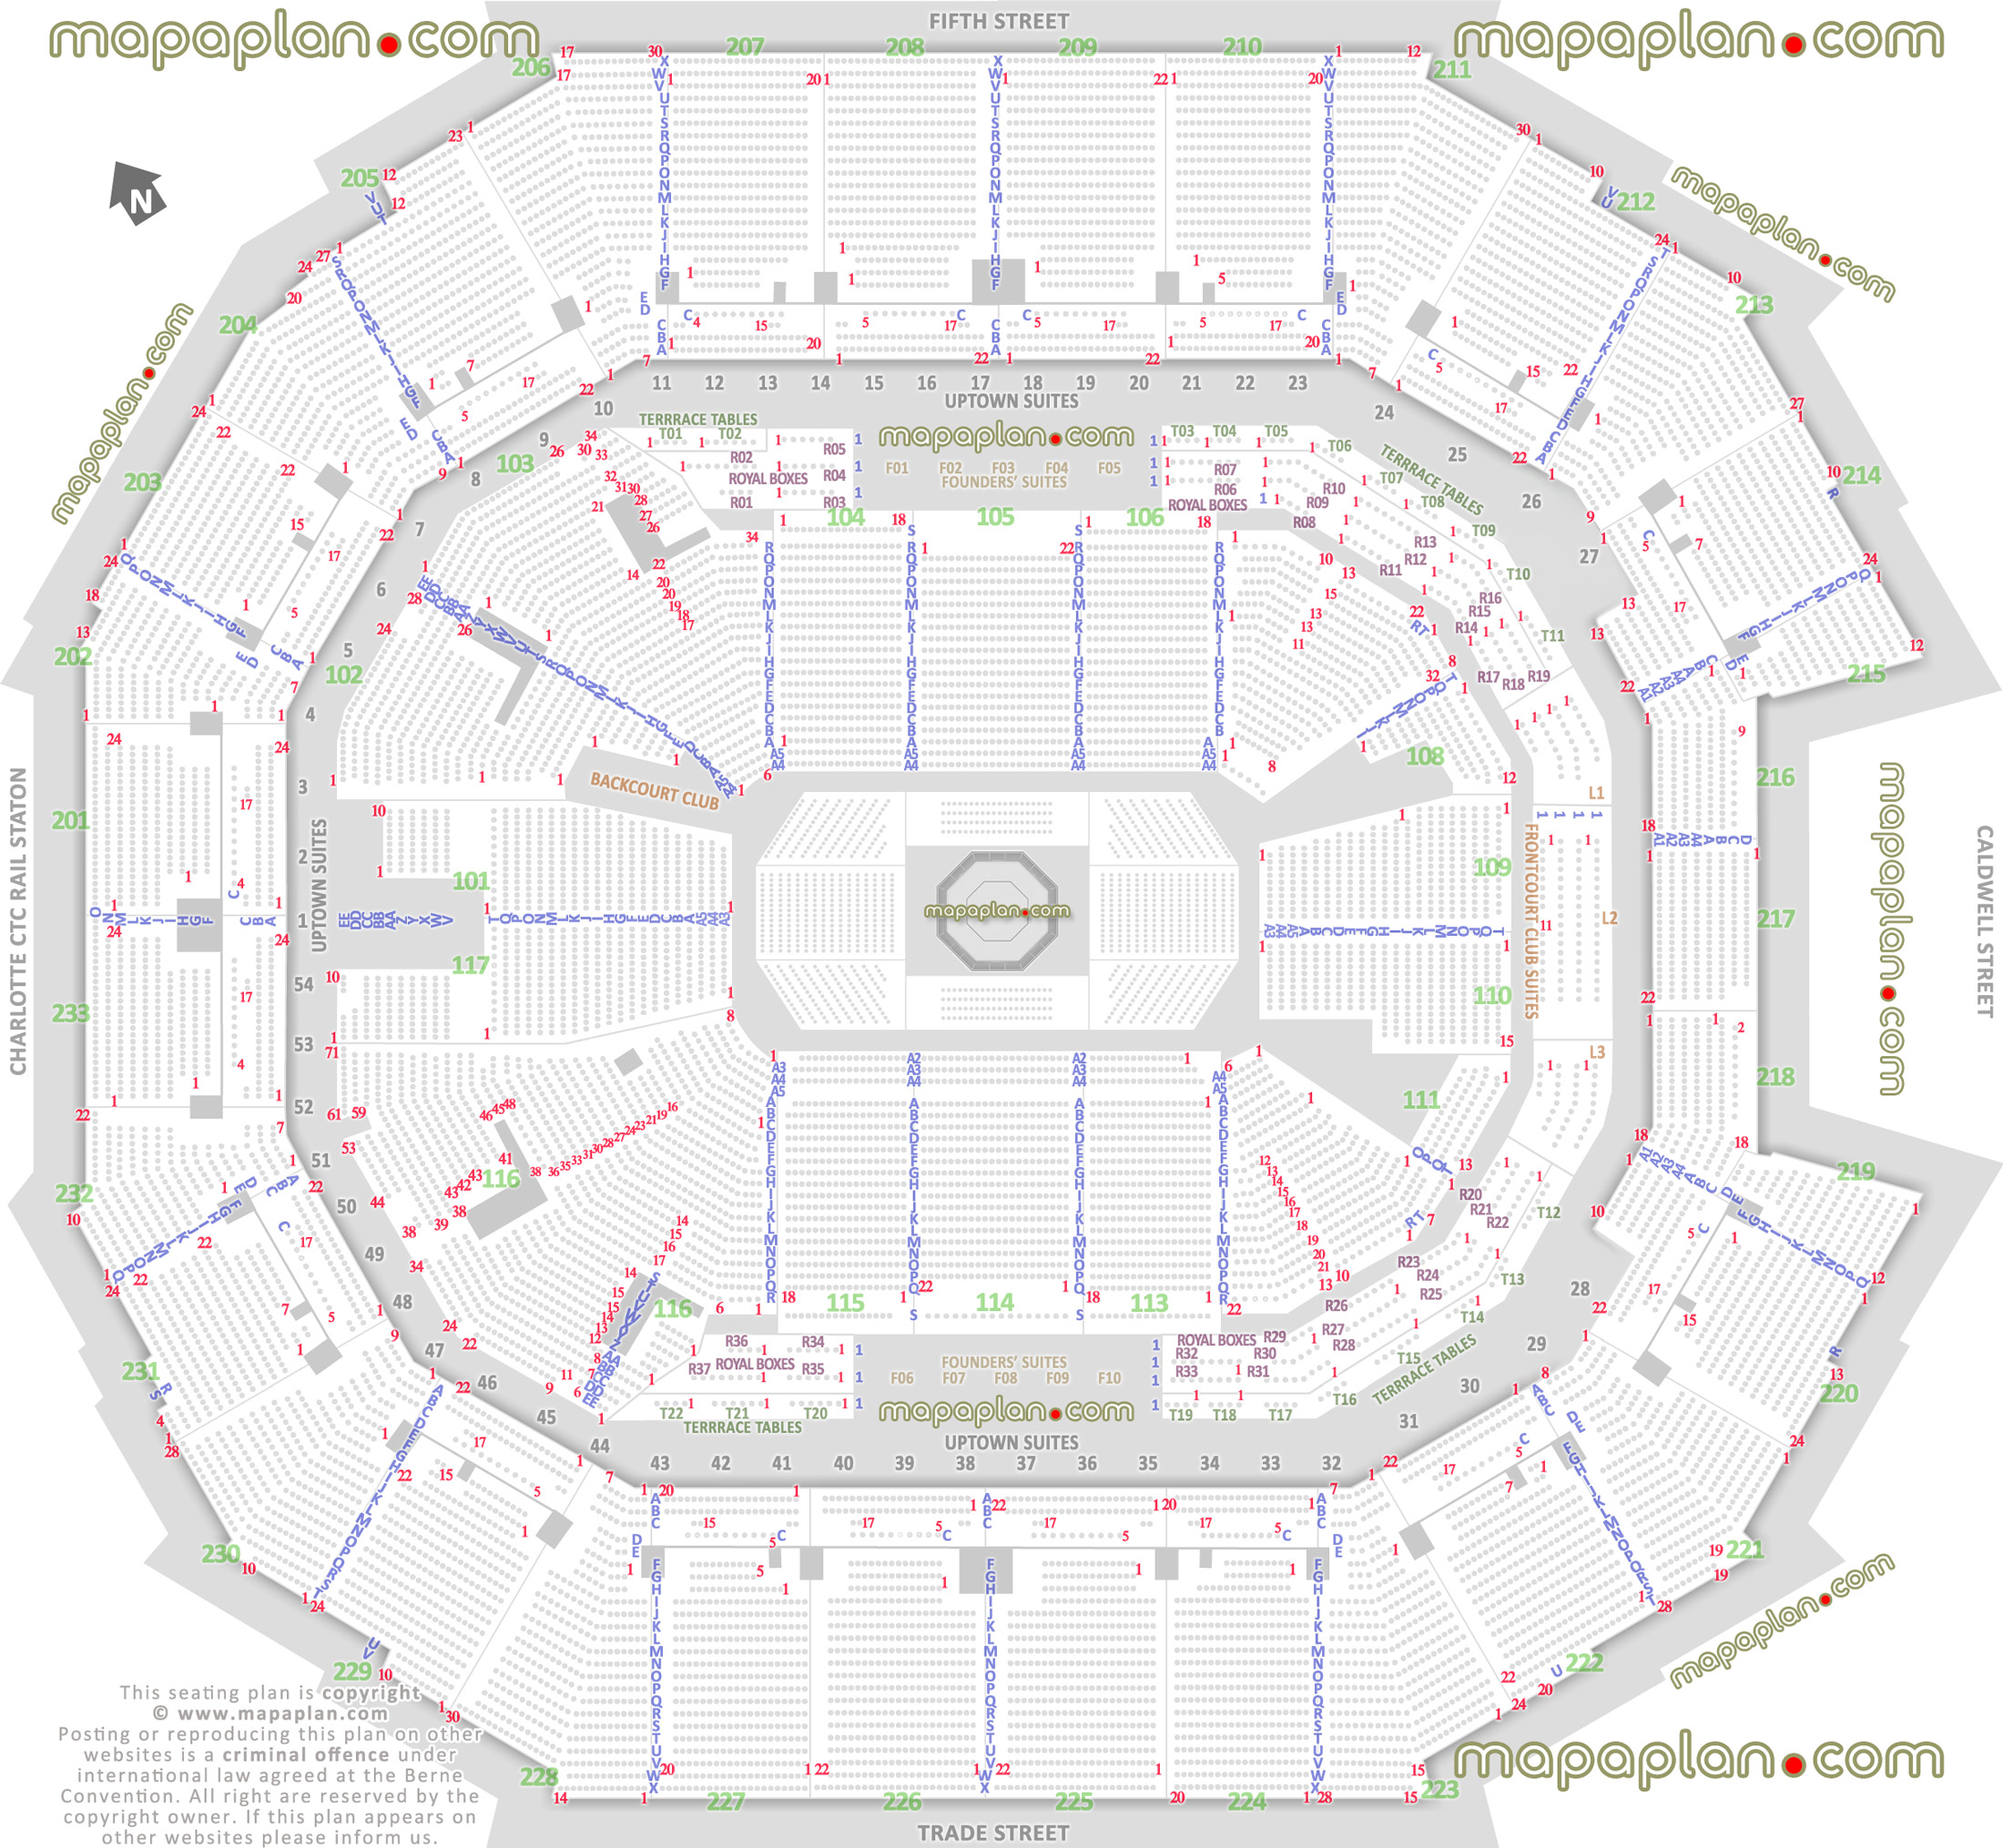 ufc mma fights charlotte north carolina usa detailed seating capacity arrangement arena row numbers layout lower upper level main entrance gate exits map west east south north detailed fully seated chart setup standing room only sro areas wheelchair disabled handicap accessible seats plan Charlotte Time Warner Cable Arena seating chart